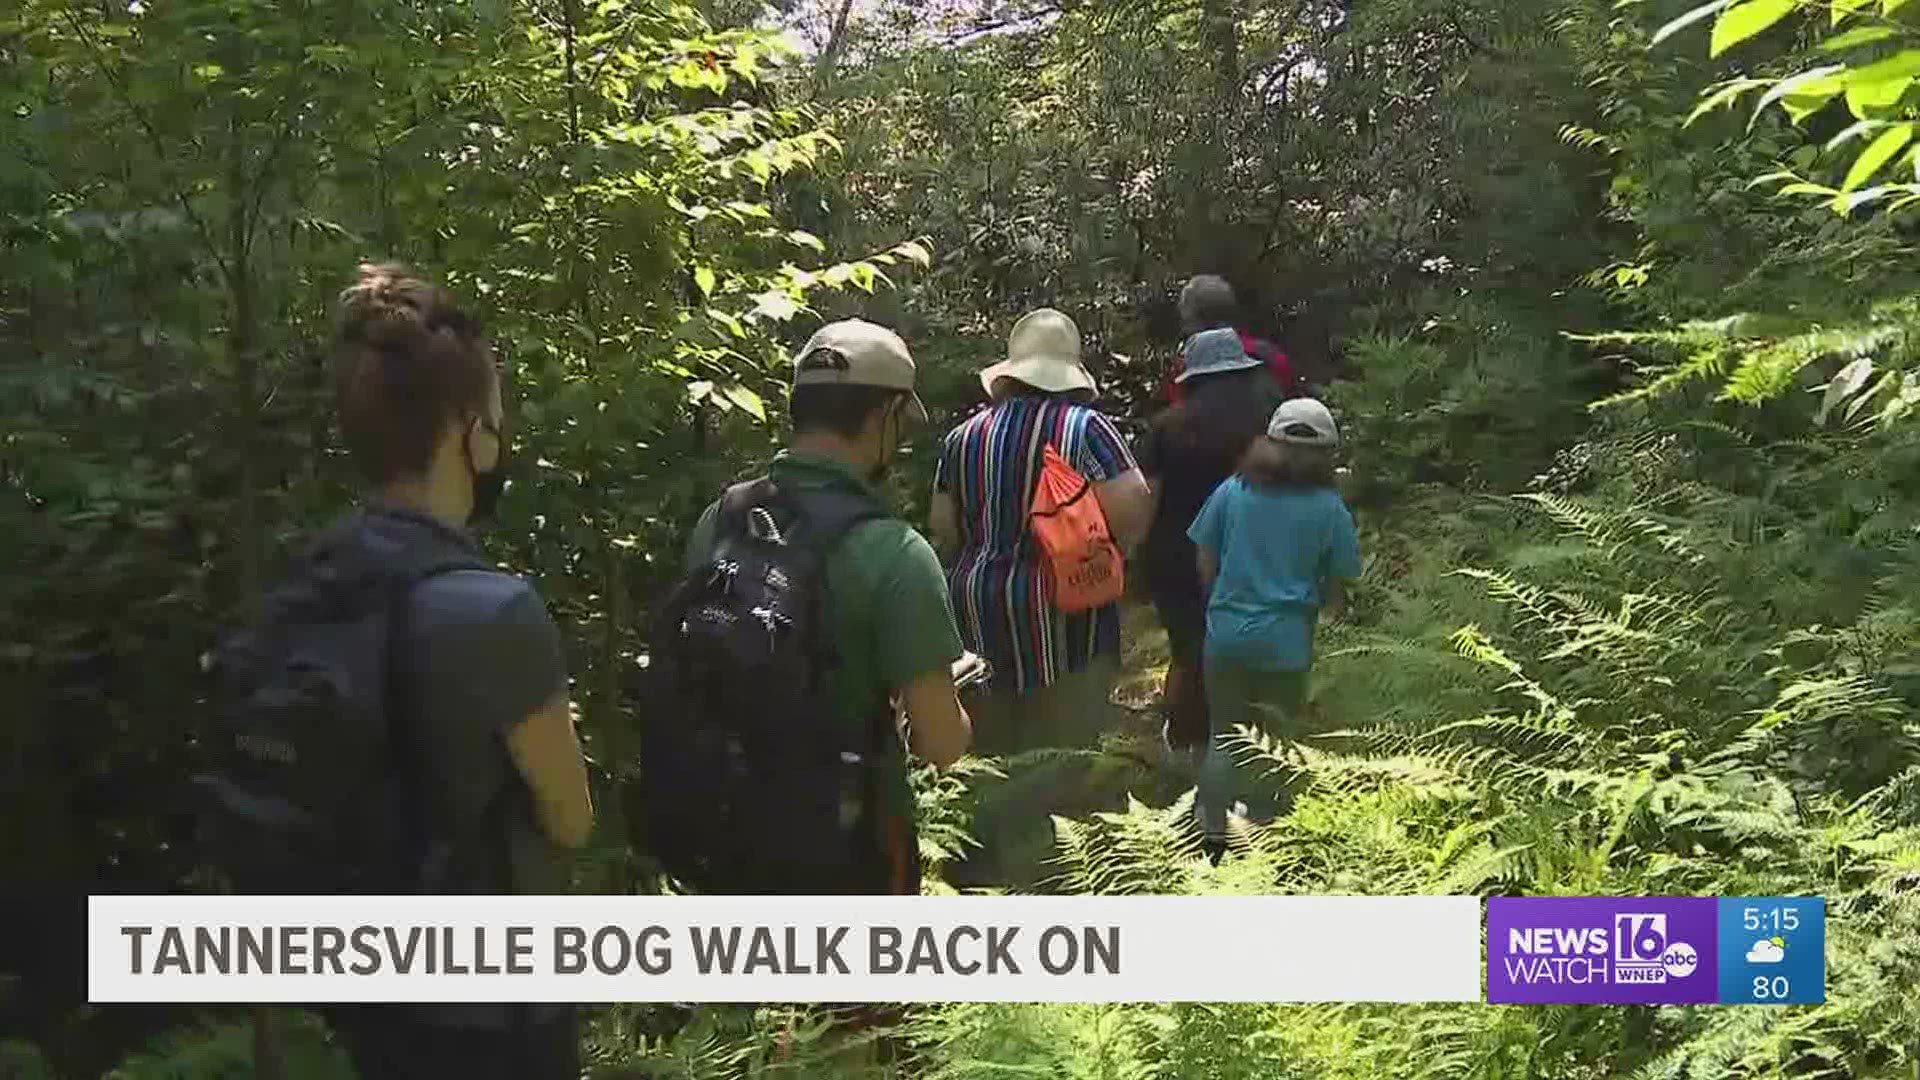 For the first time in more than a year, nature lovers were able to take a hike through a unique environment in Monroe County.